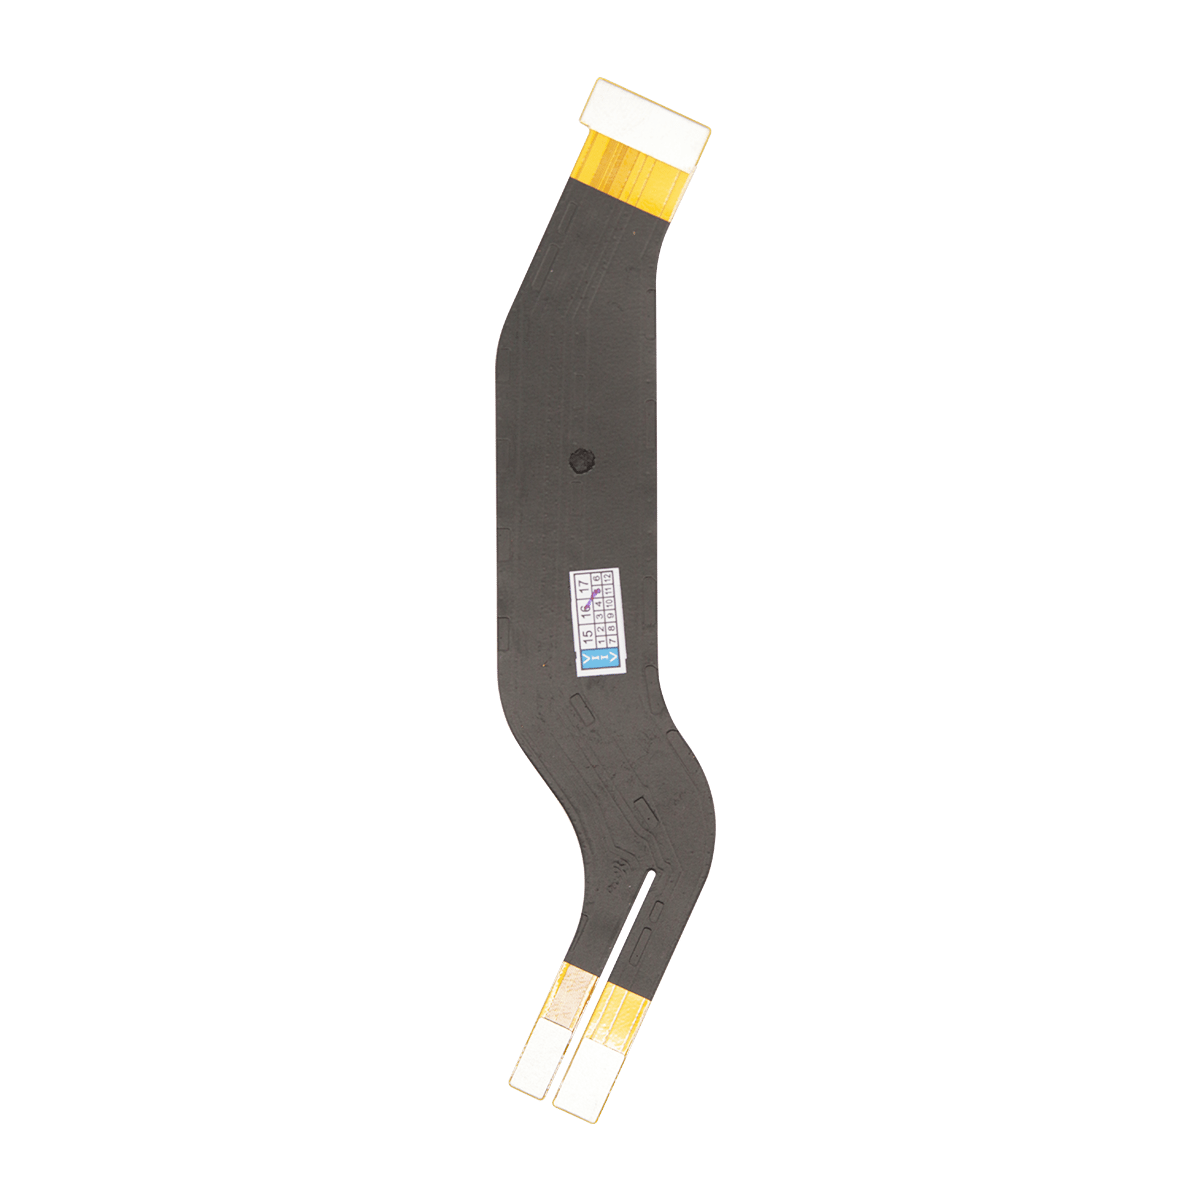 Huawei Nexus 6P Interconnect Cable Replacement